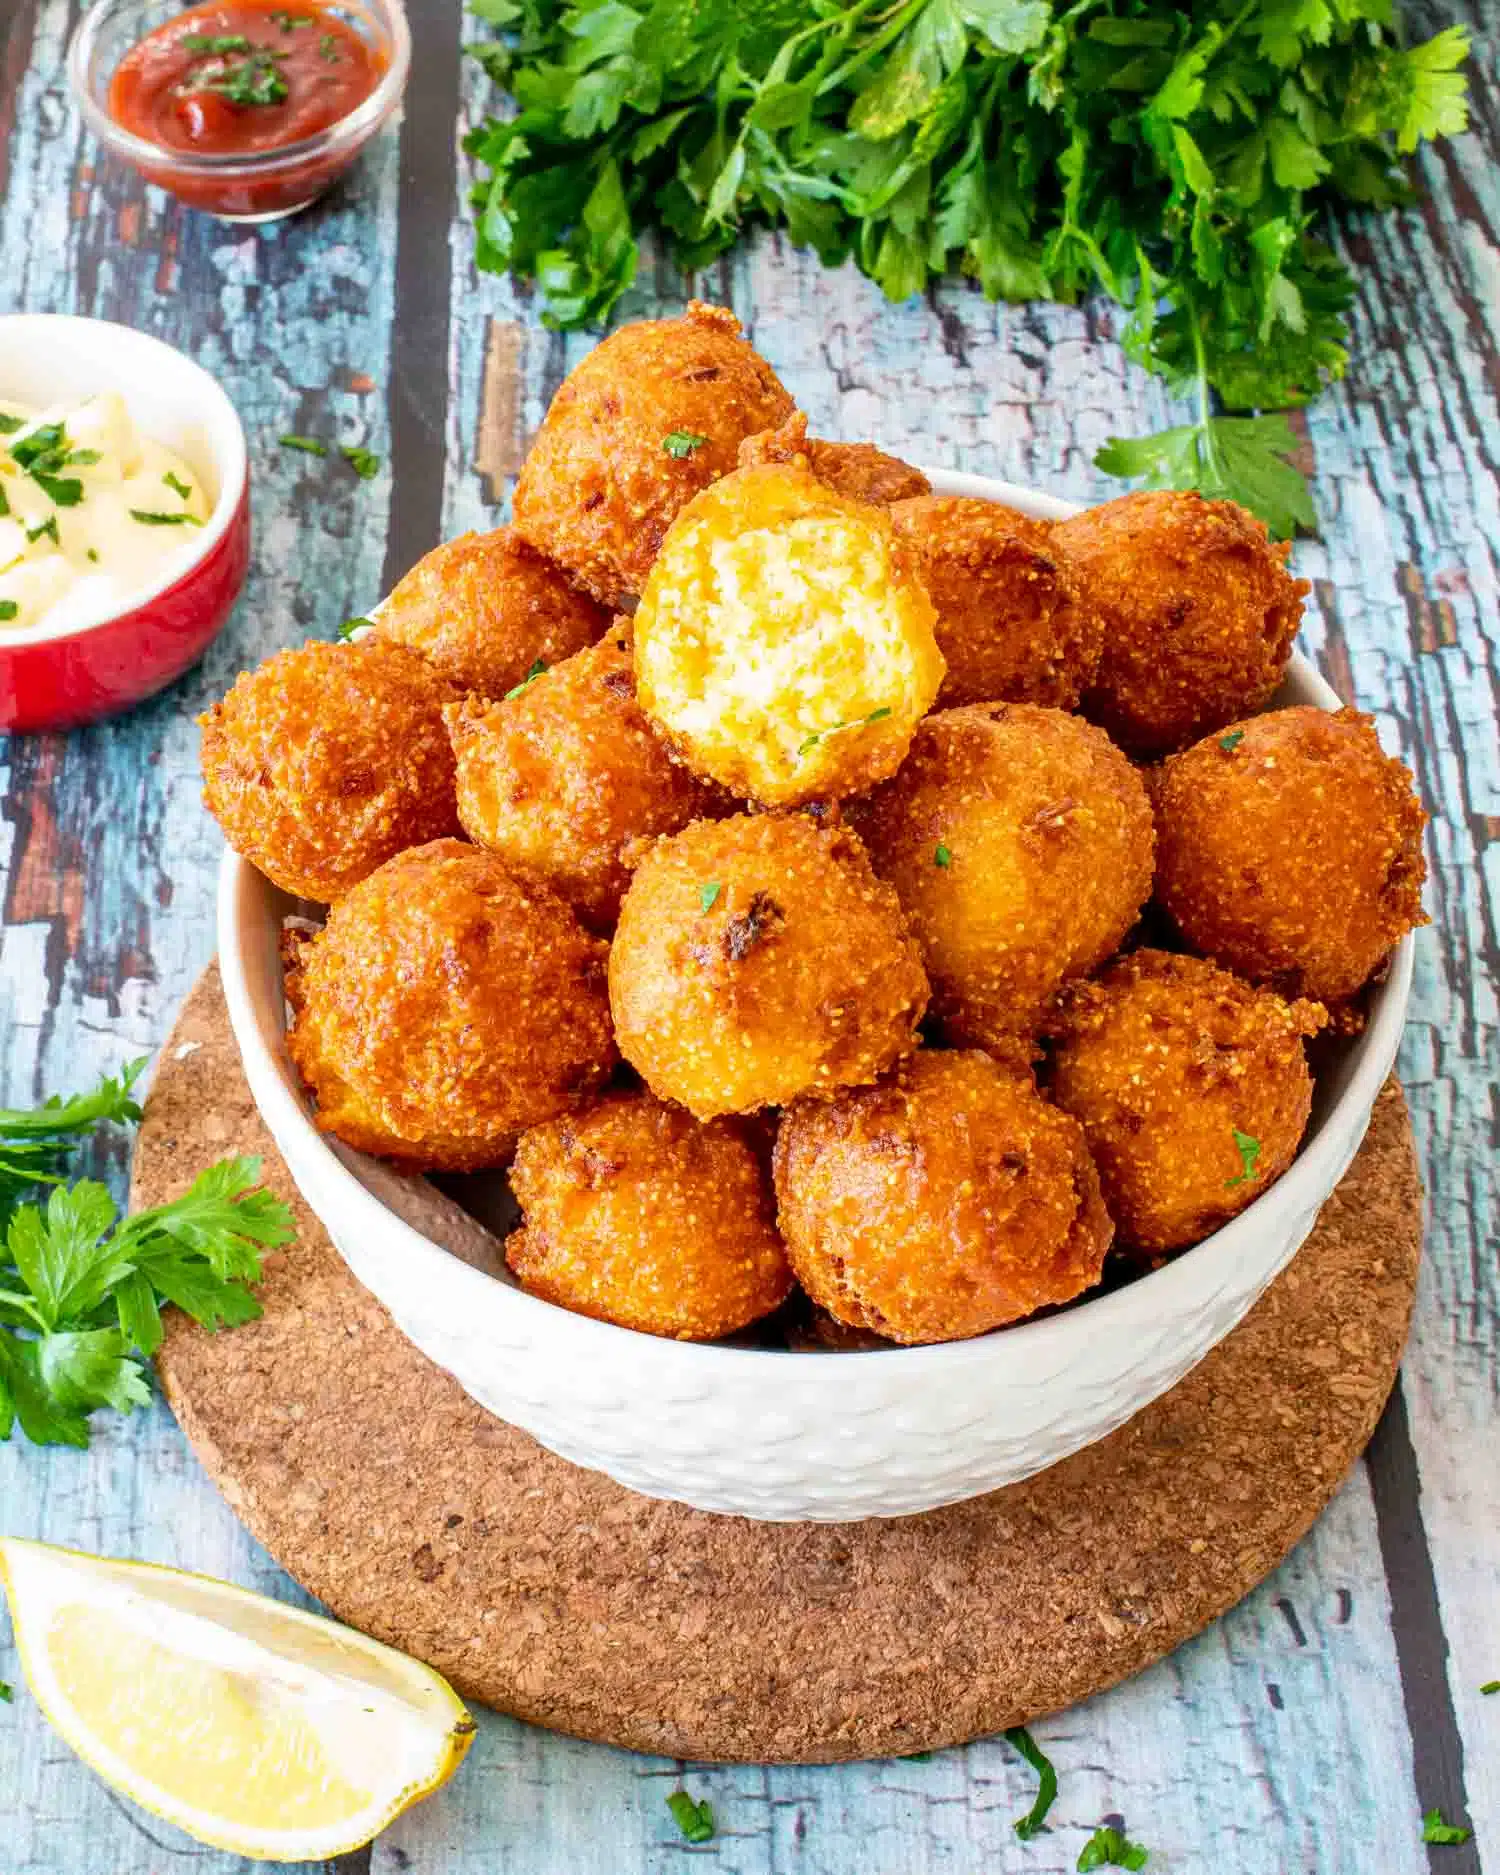 Hush Puppies - Craving Home Cooked